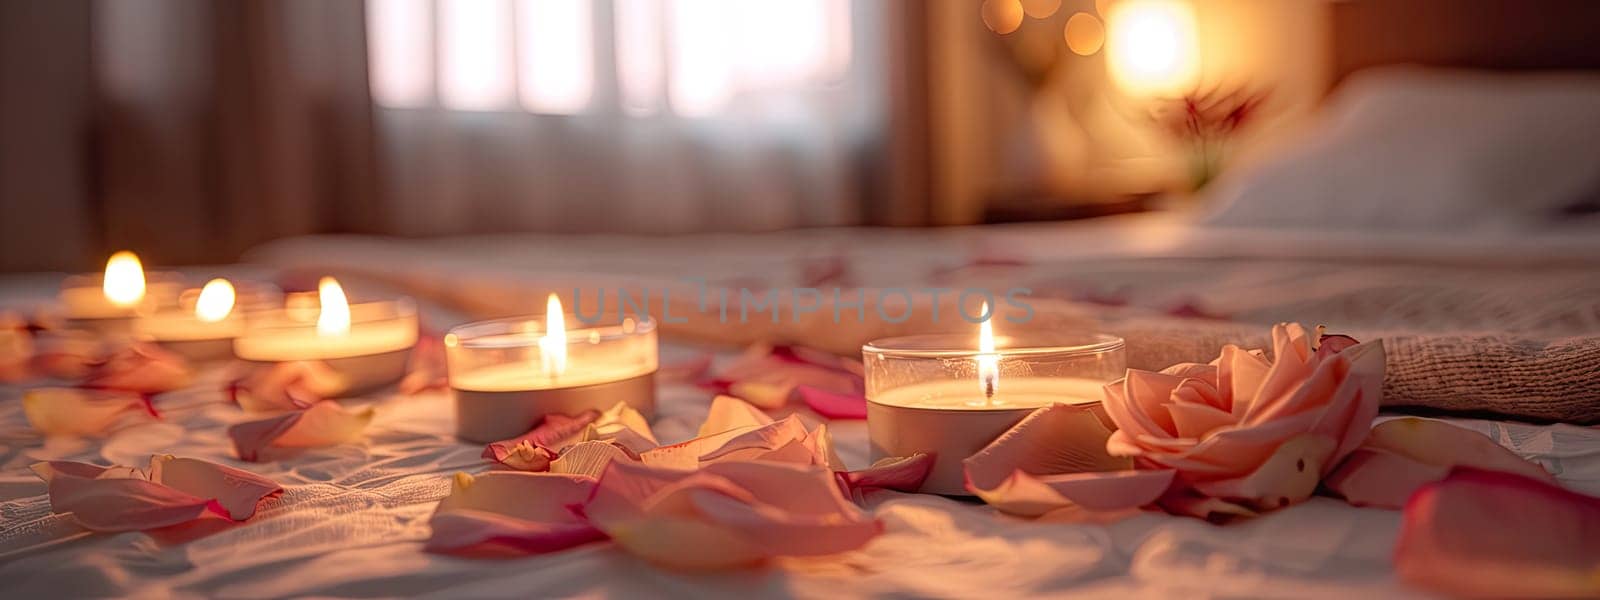 Bed of candles and rose petals. Selective focus. by yanadjana